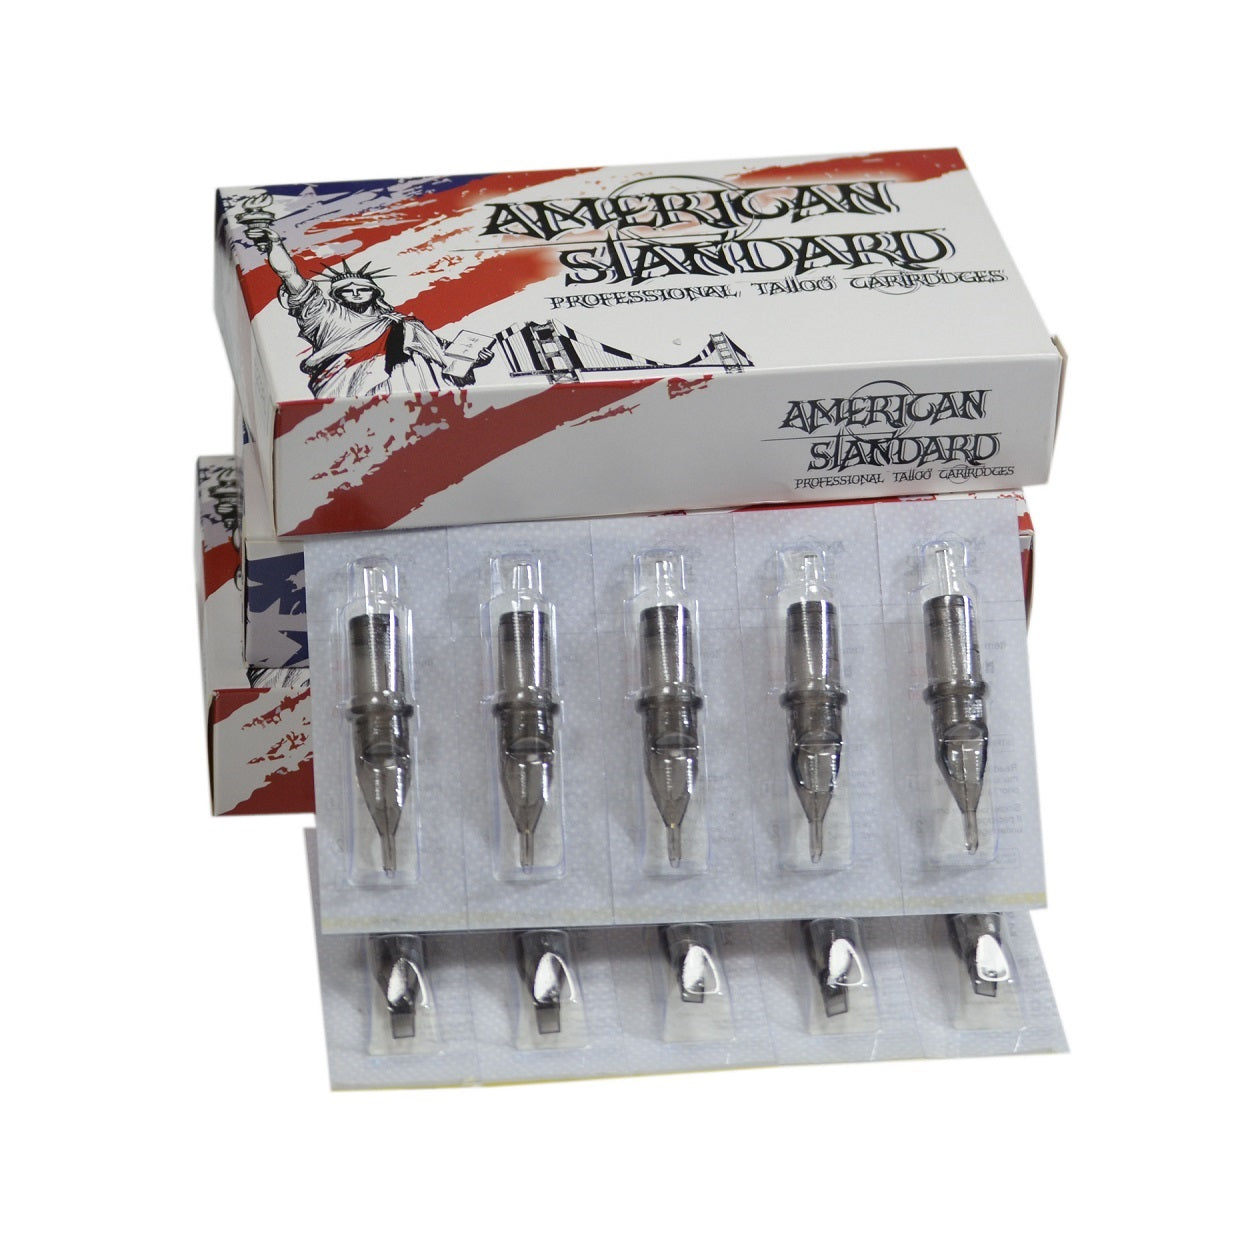 Buy Wormhole Tattoo Needle Cartridges Tattoo Liner Needles Round Liner  Needles Disposable #12 Standard Tattoo Needles Cartridge Box of 20 (#12,  09RL) Online at Lowest Price Ever in India | Check Reviews